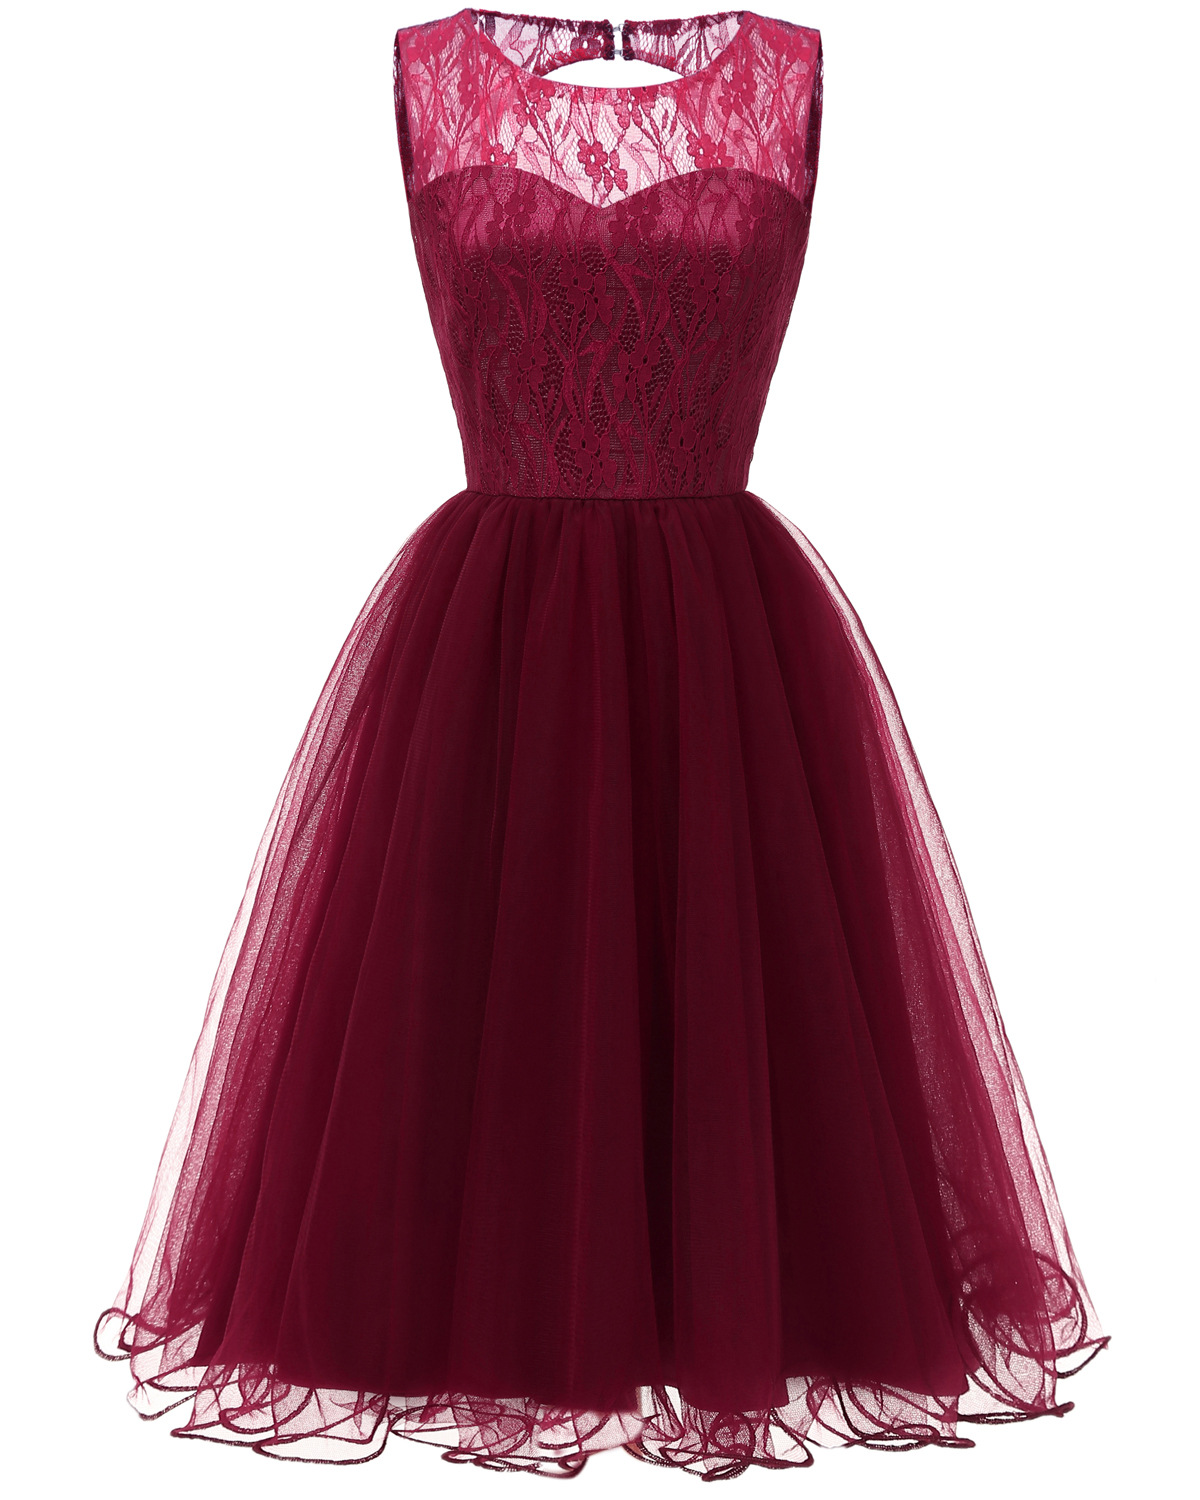 Lace Patchwork Women Vintage Dress Autumn Summer Sleeveless Hollow Party Dress - Wine Red